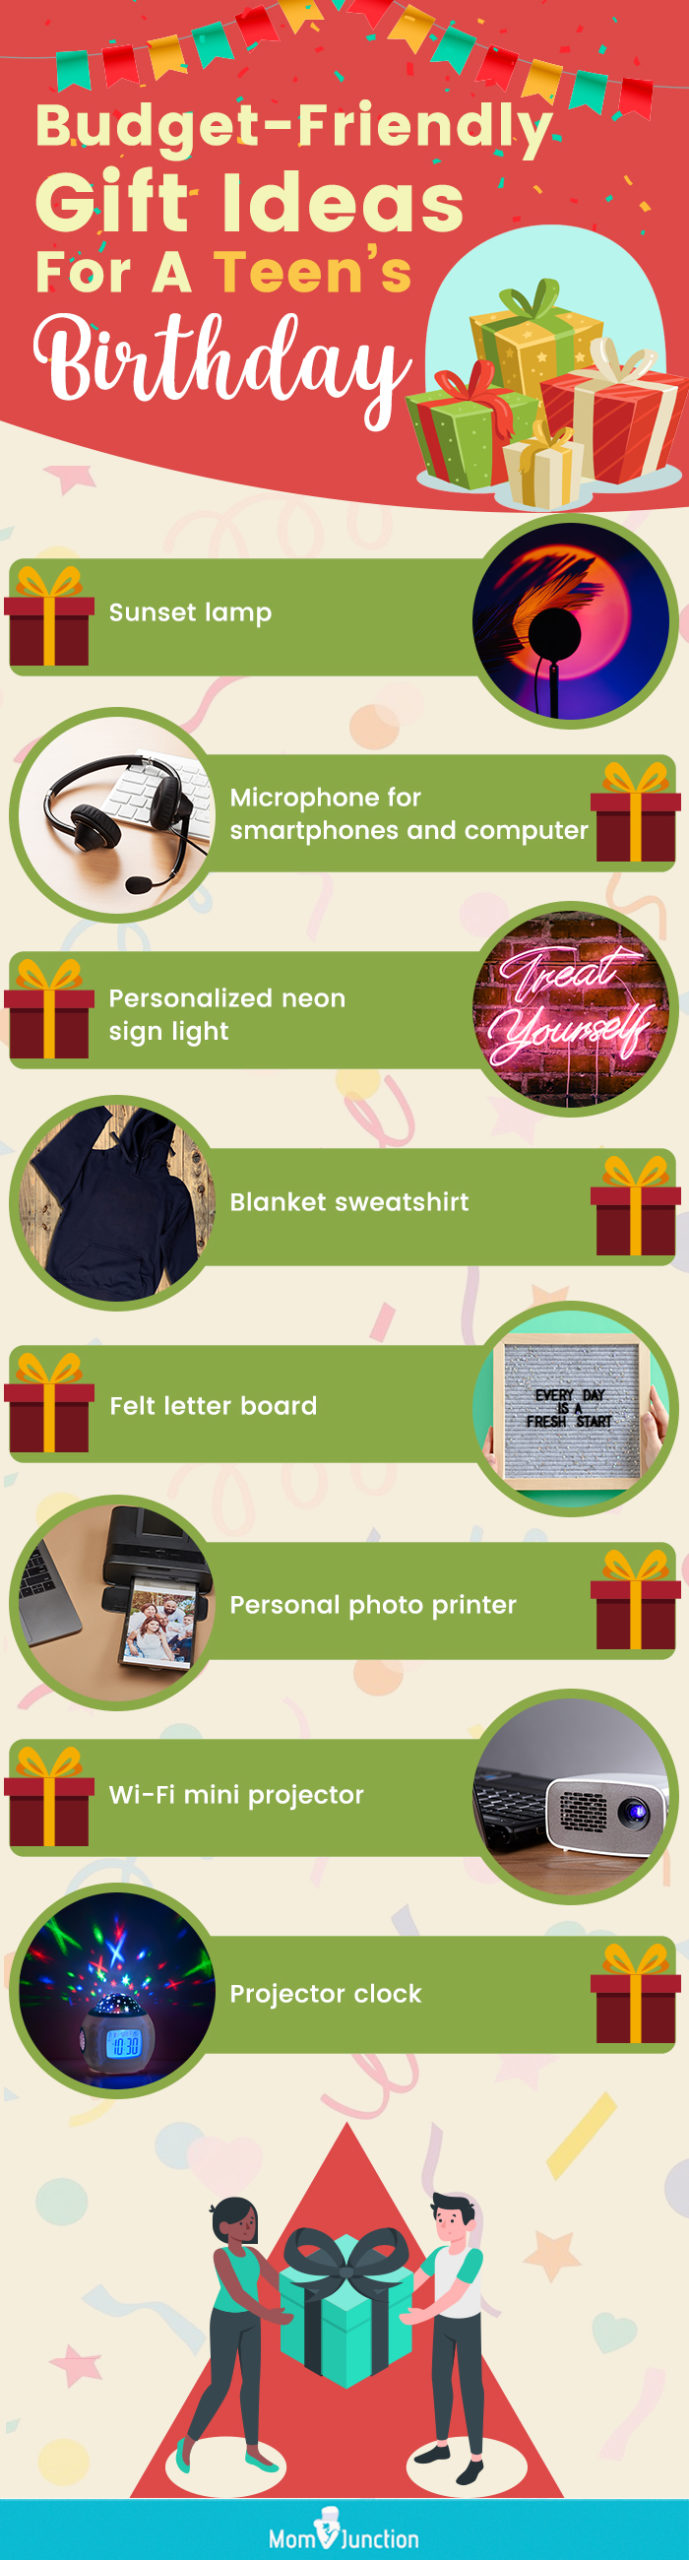 budget friendly gift ideas for a teens birthday (infographic)